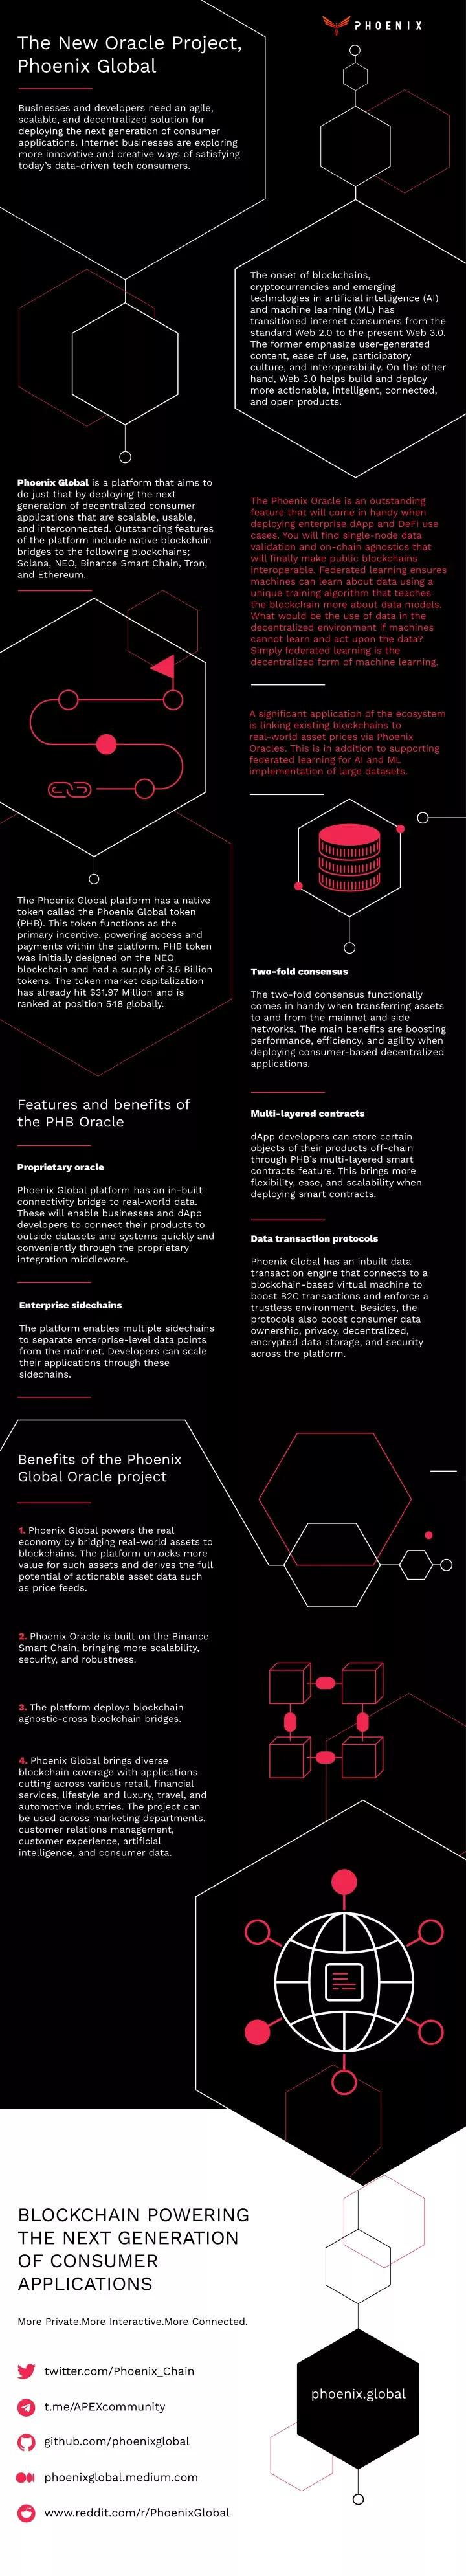 the new oracle project phoenix global